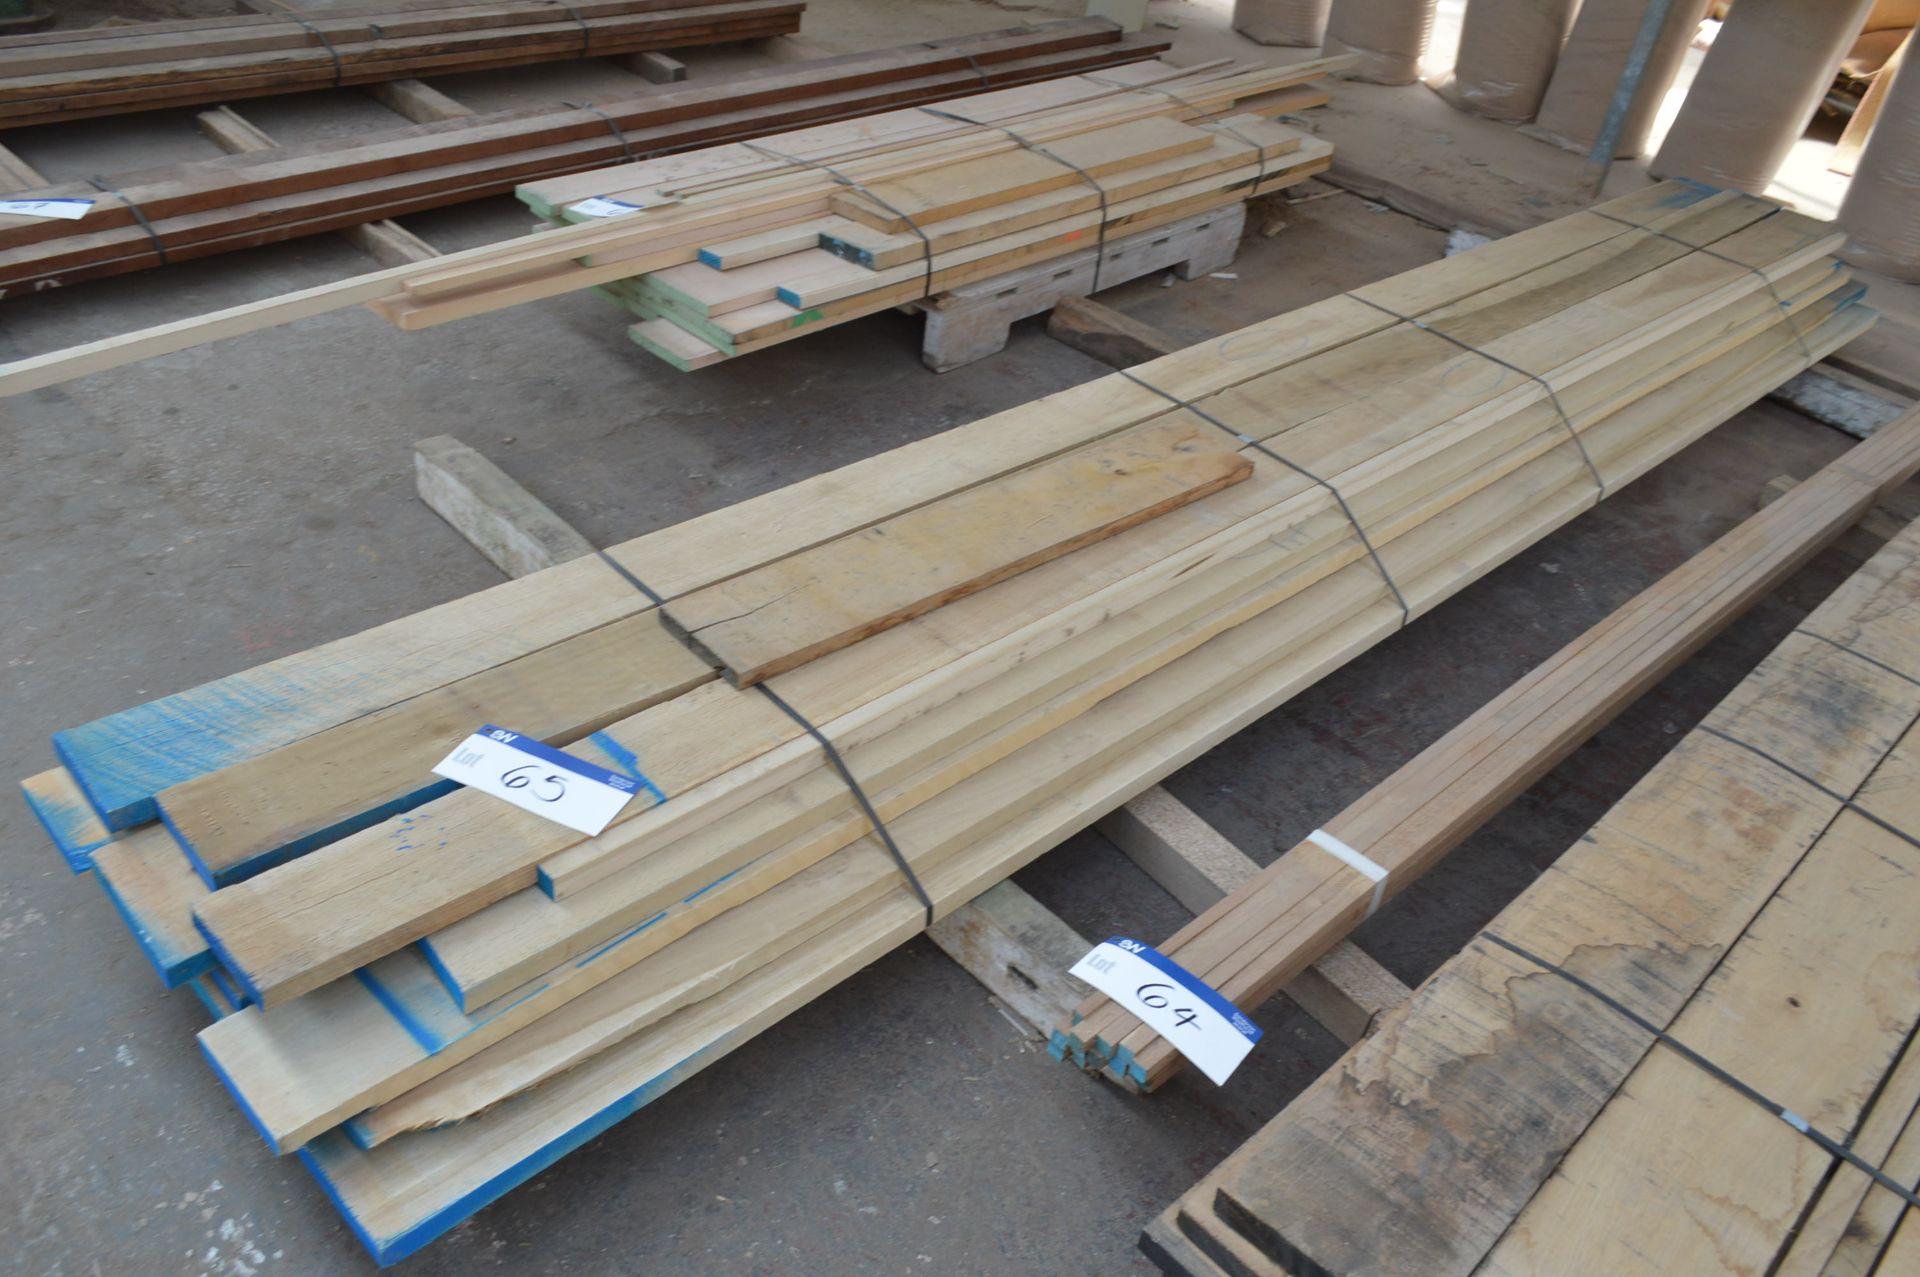 Tulipwood Timber, as set out